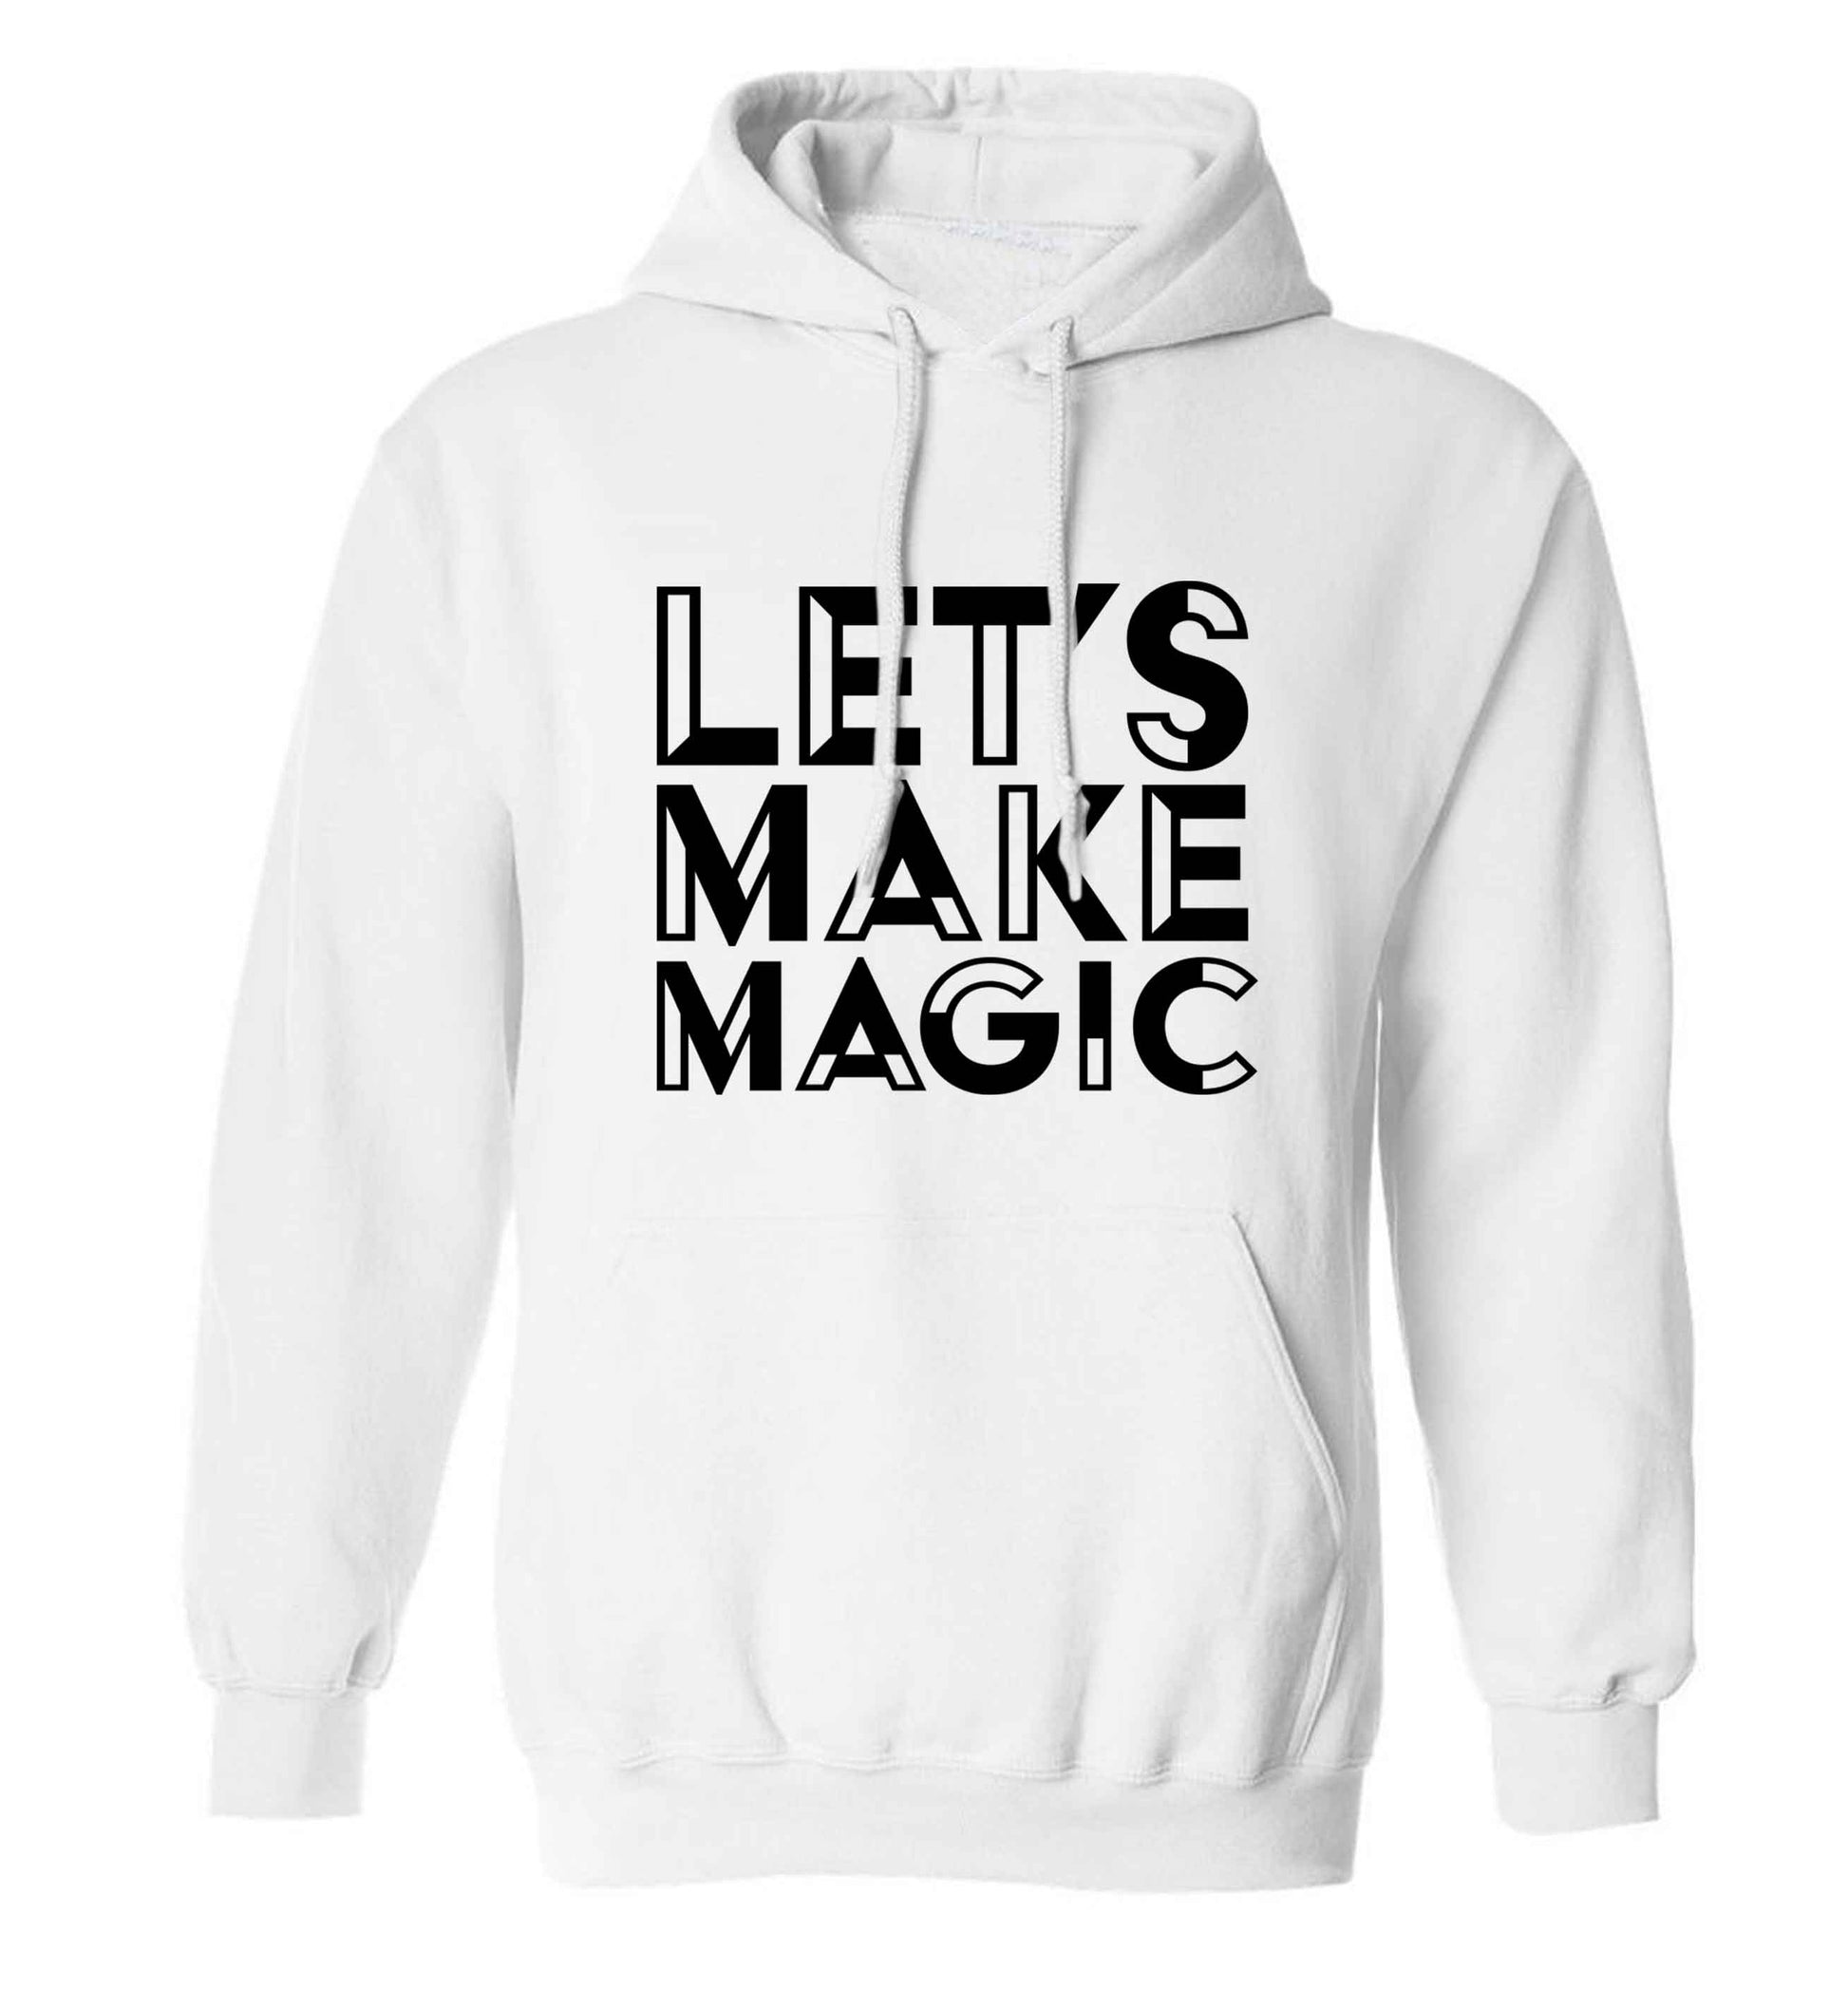 Let's make magic adults unisex white hoodie 2XL